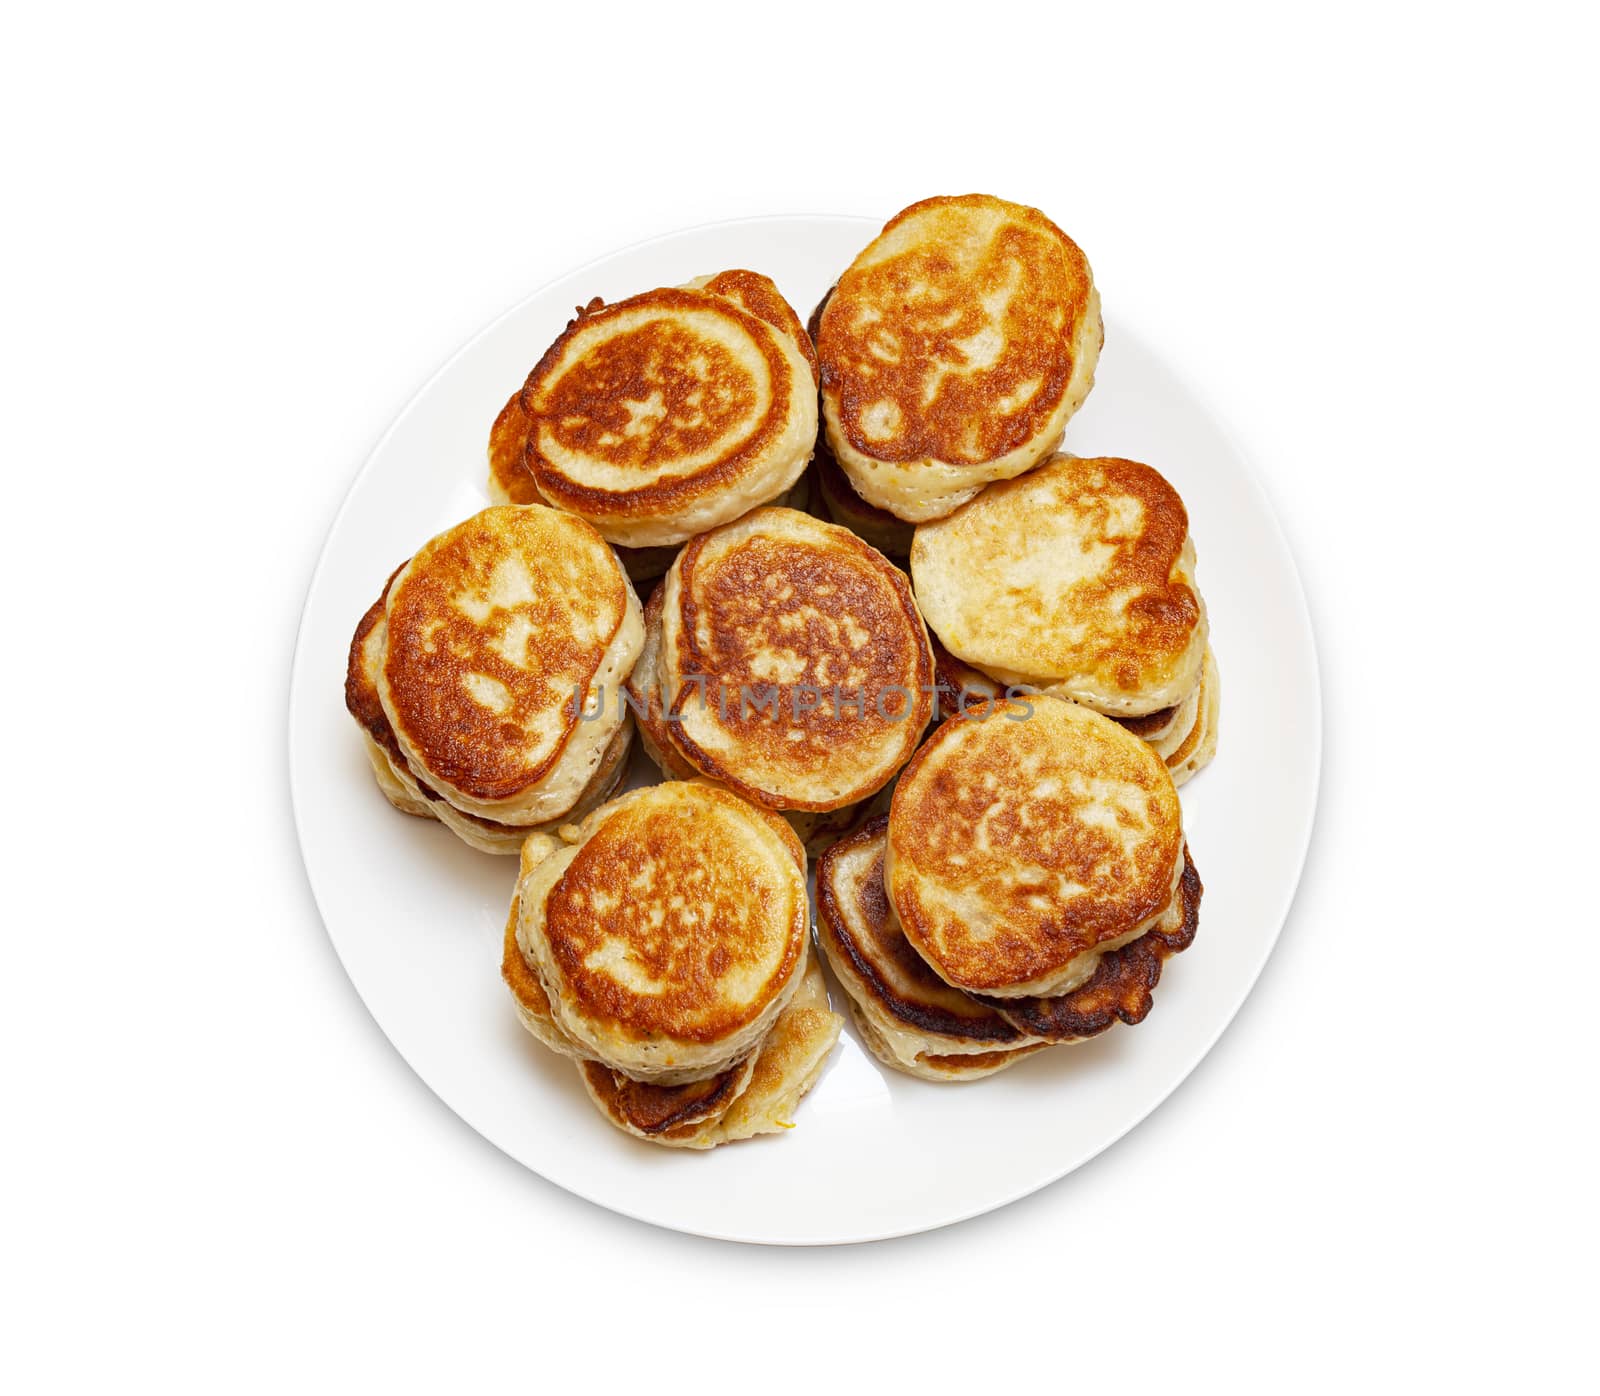 A pile of freshly baked pancakes lay on a plate isolated on white background. View from the top. With clipping path.